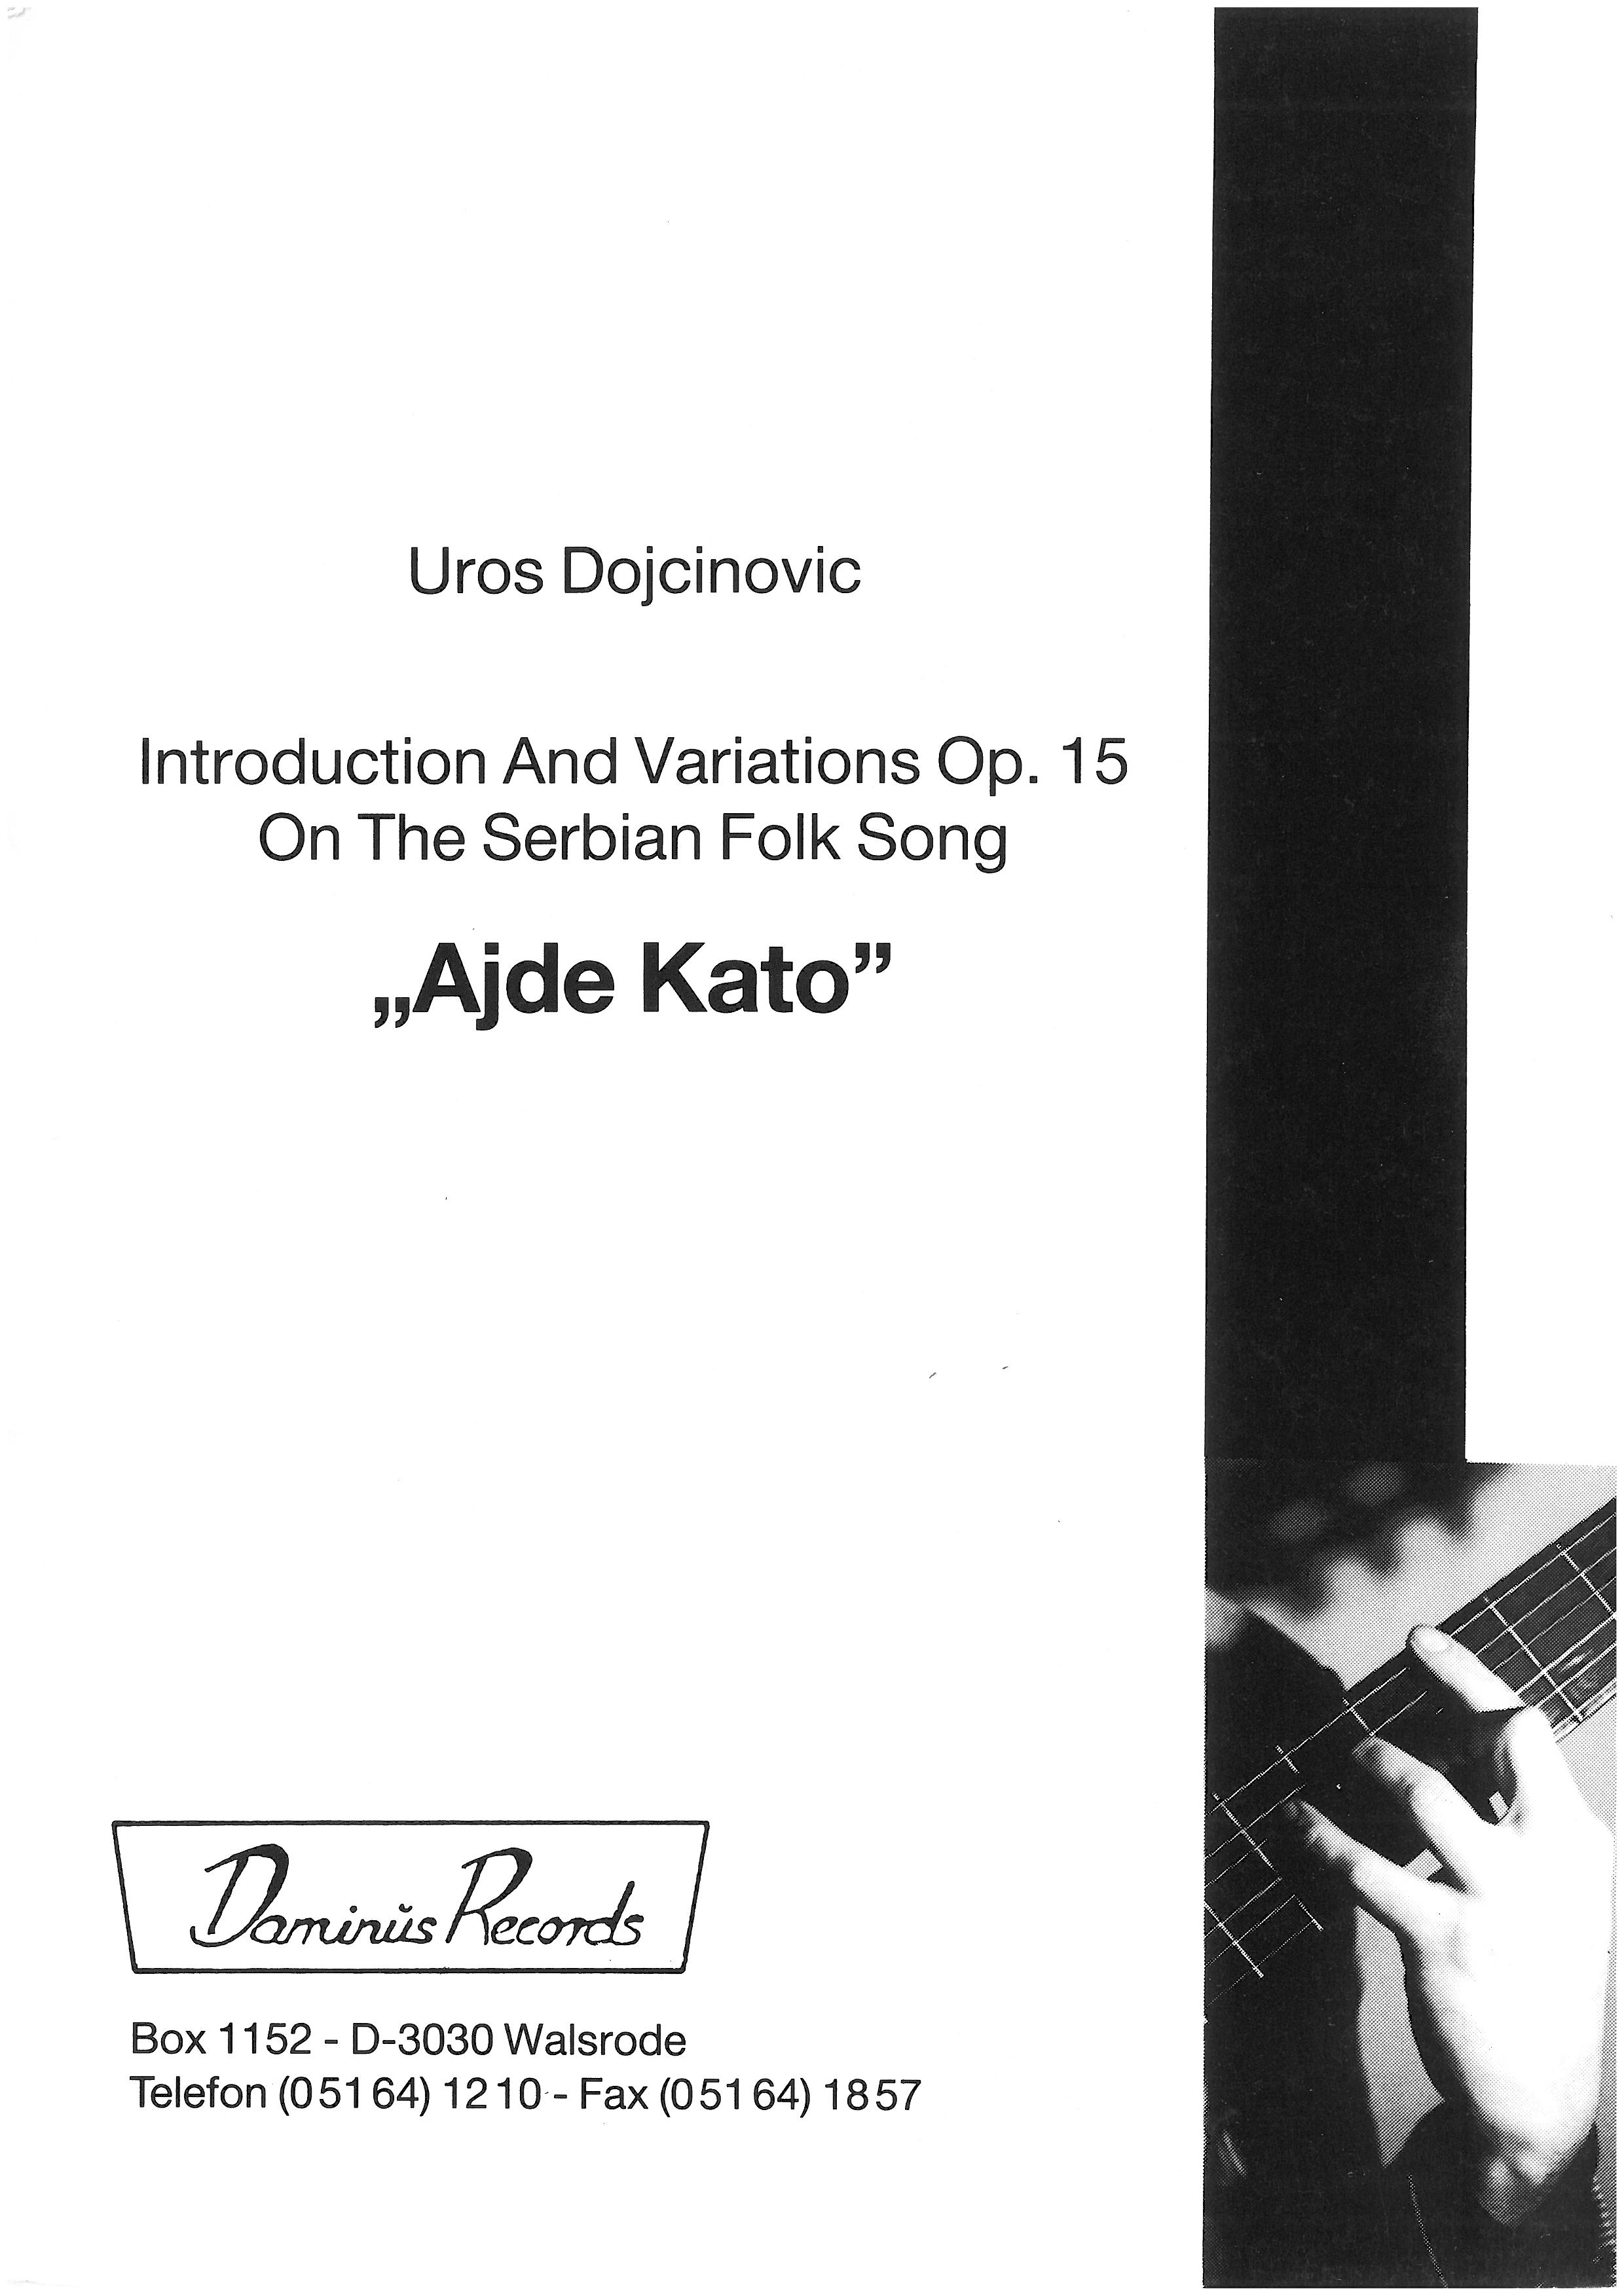 Introduction And Variations op. 15